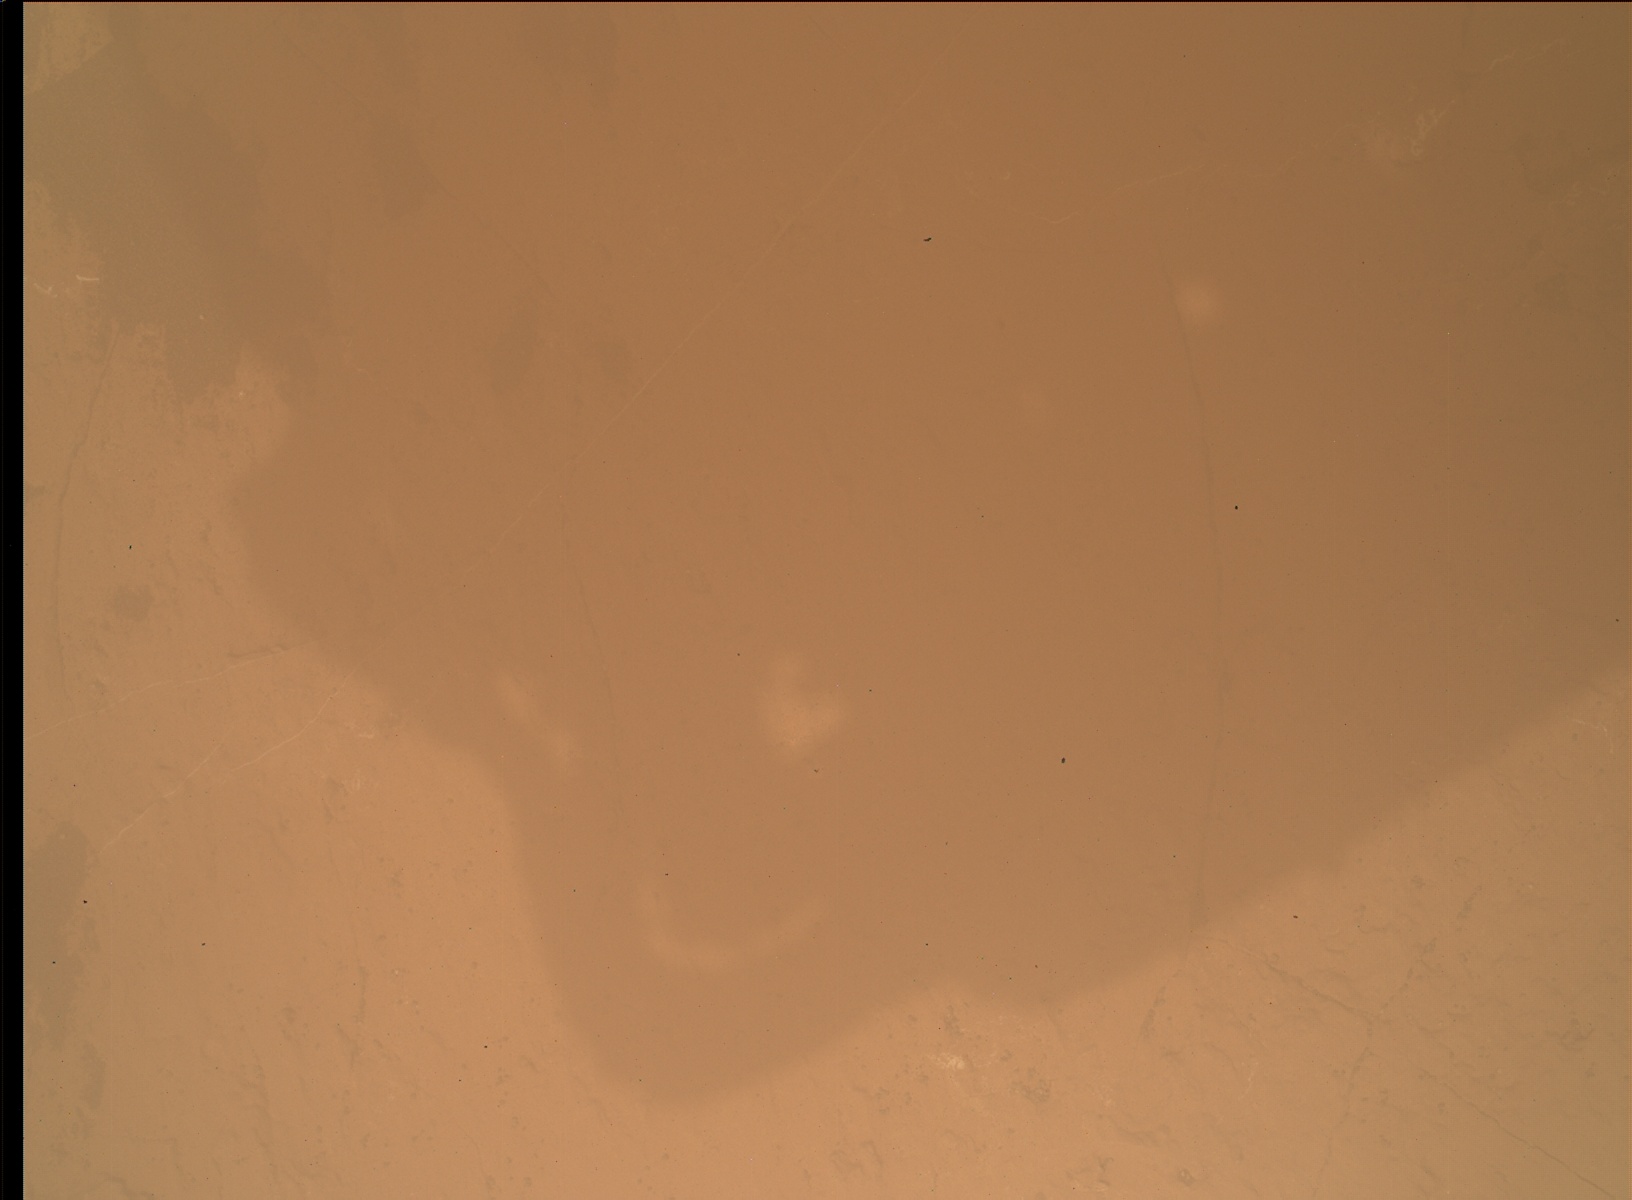 Nasa's Mars rover Curiosity acquired this image using its Mars Hand Lens Imager (MAHLI) on Sol 1536